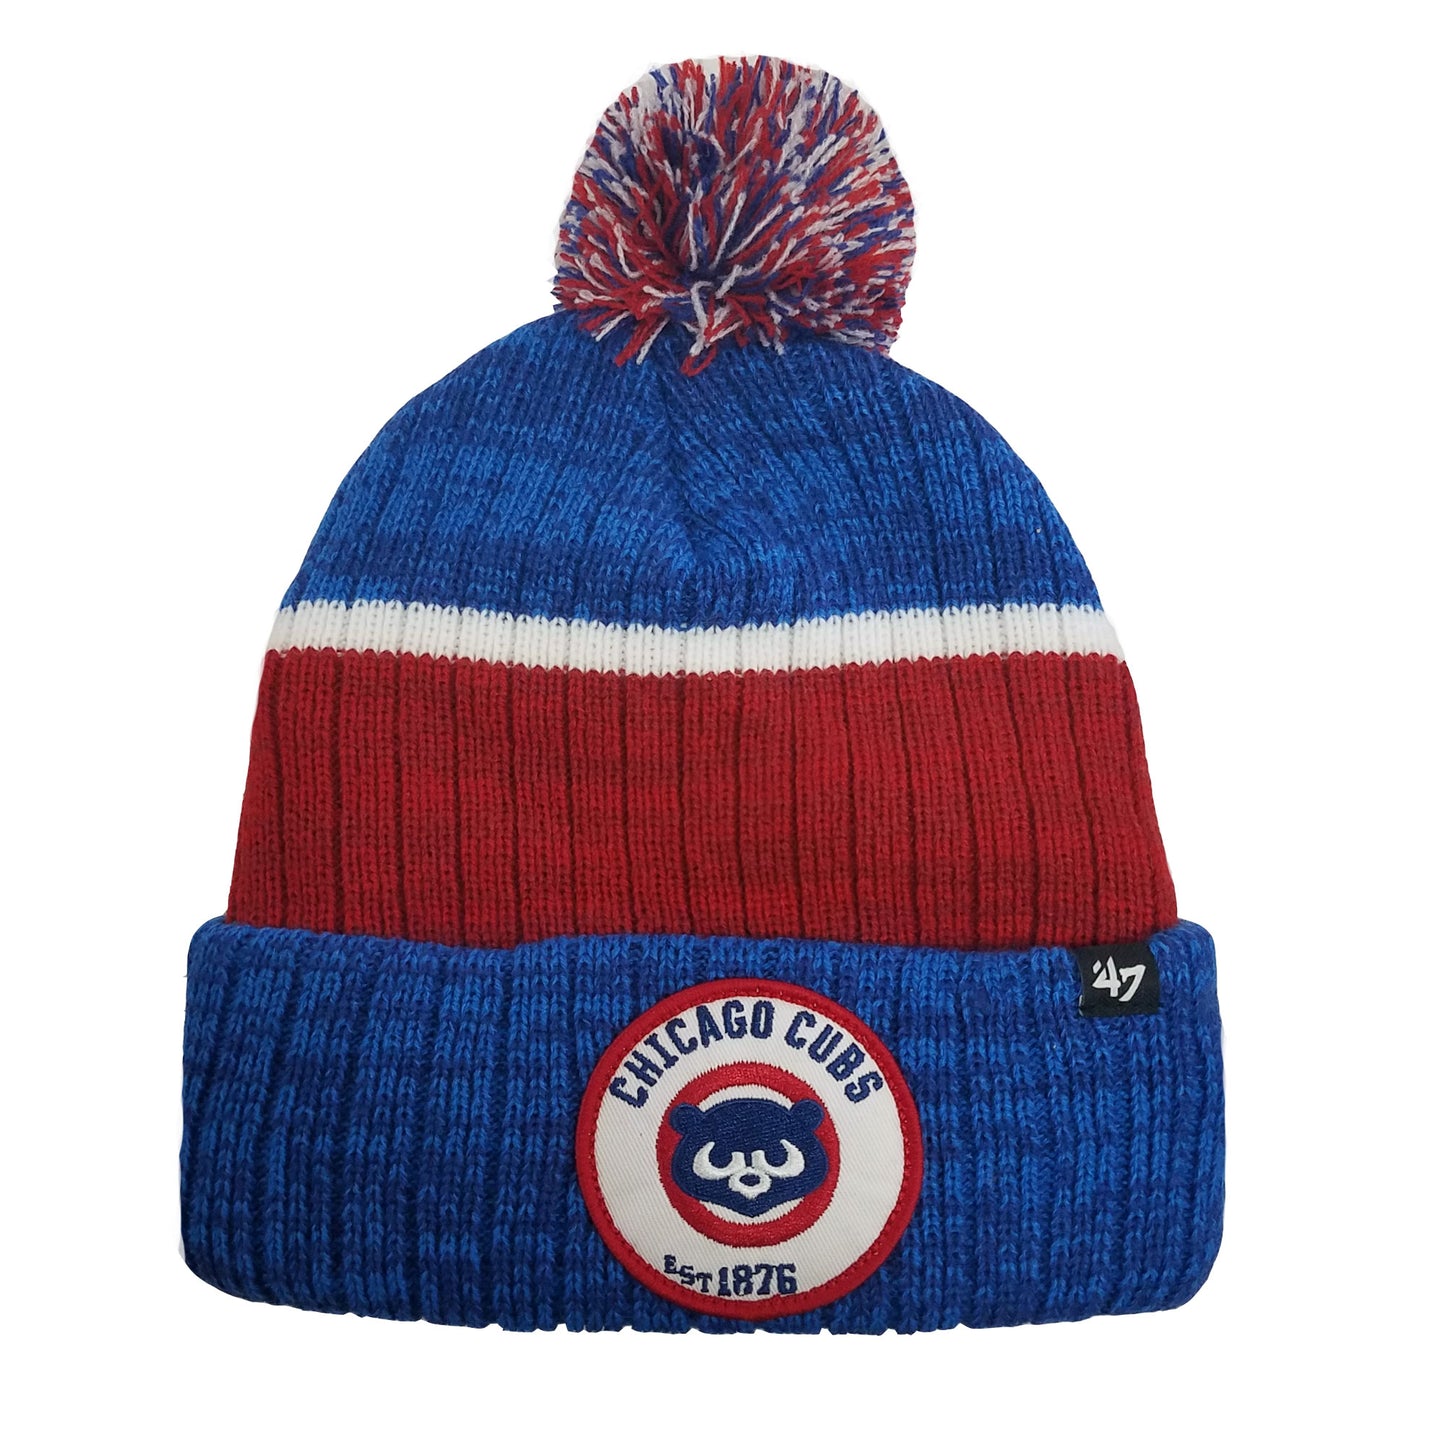 Chicago Cubs Men's Royal/Red Holcomb 47 Knit Cuff Knit w/ Pom & Patch